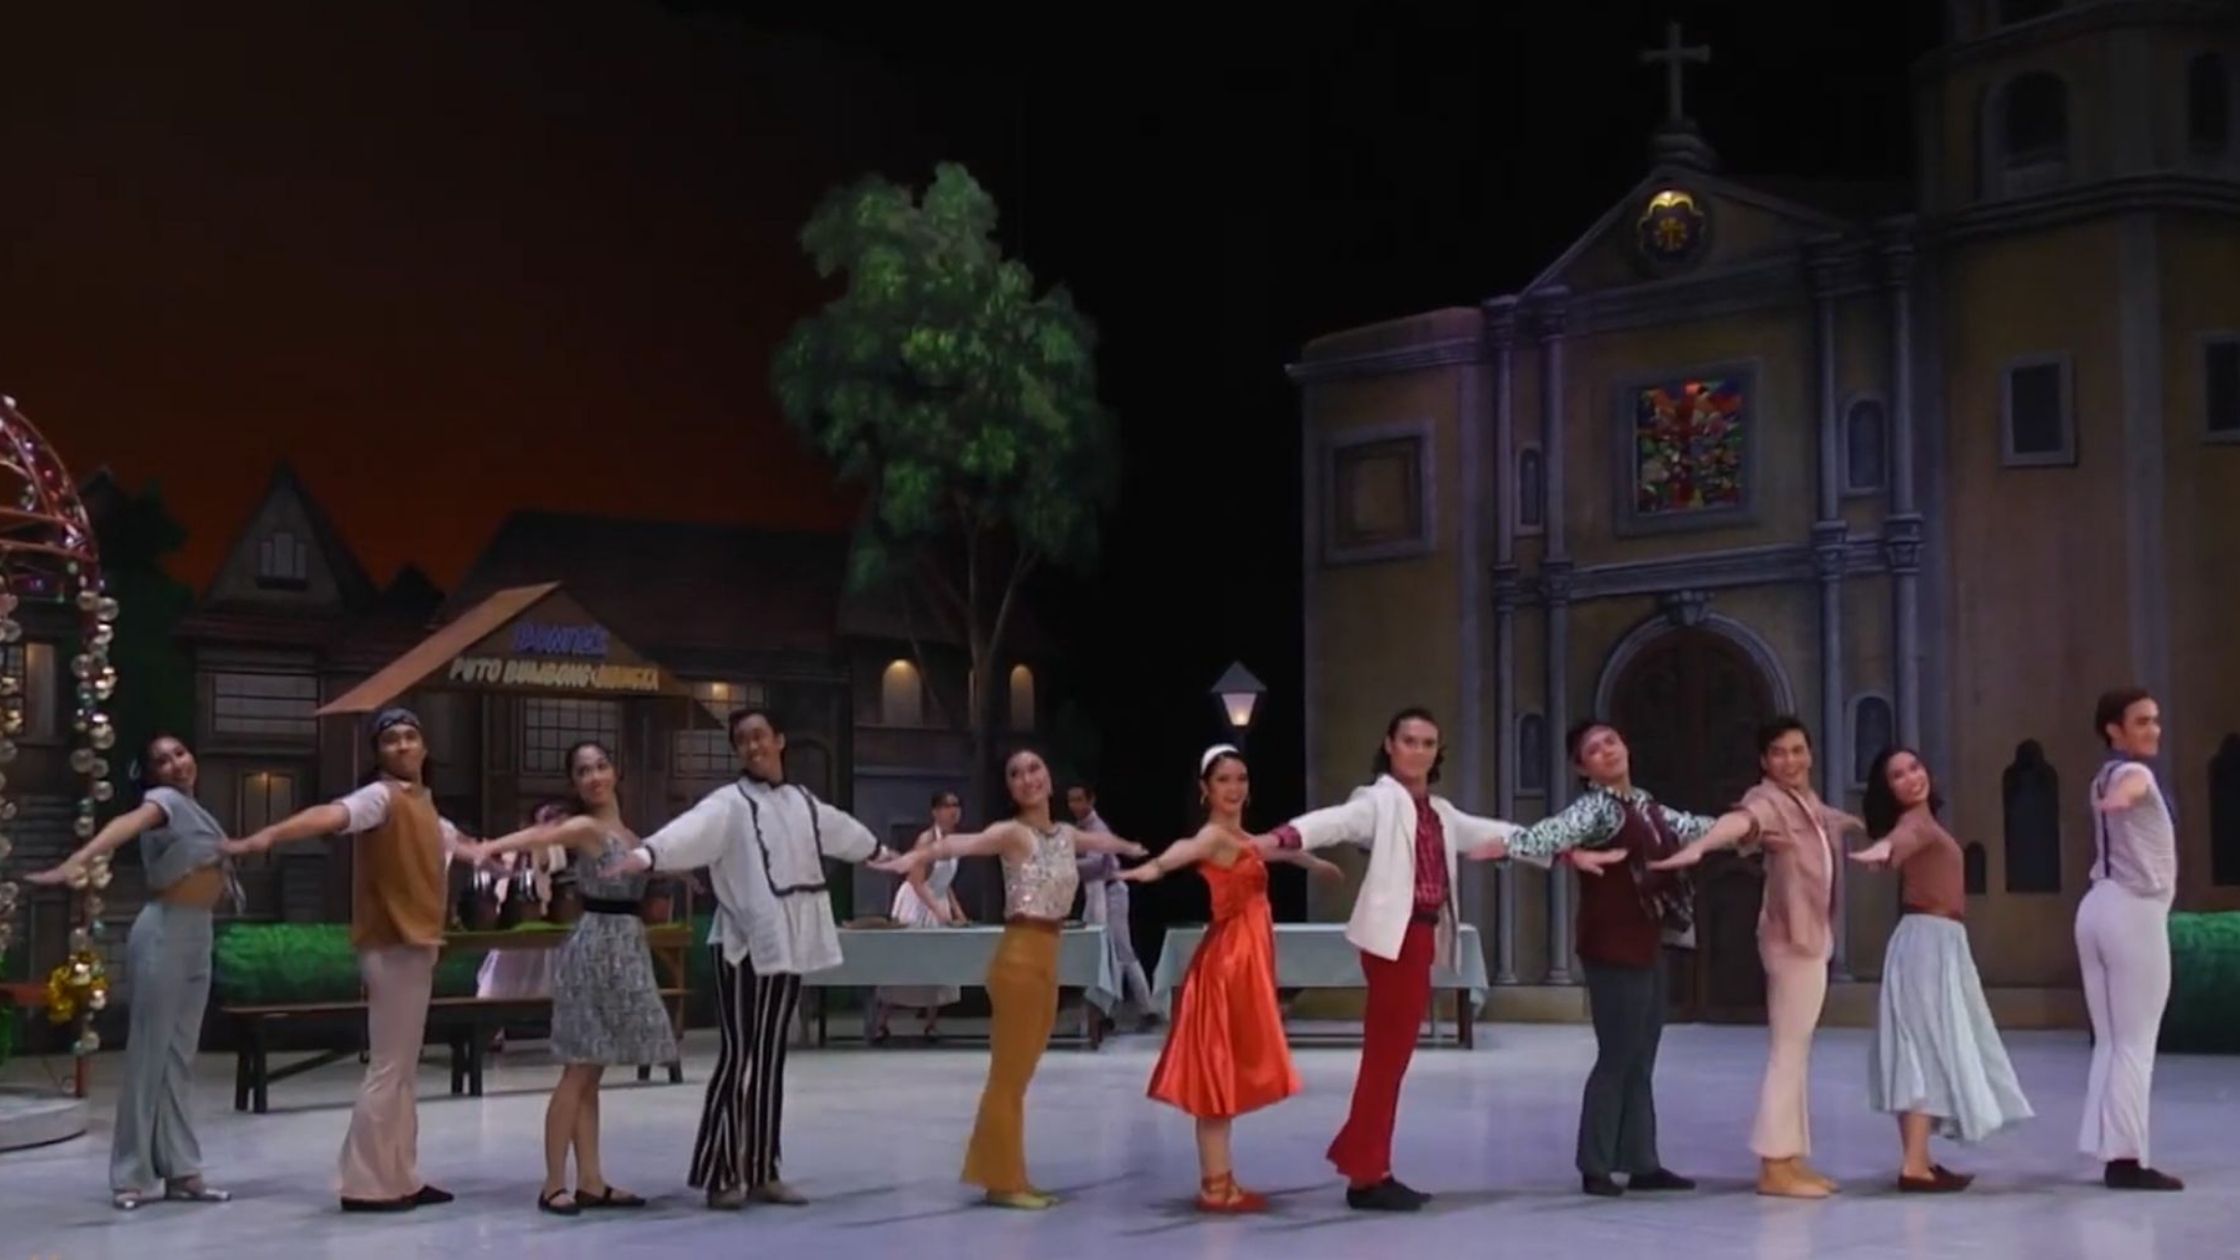 ‘A Christmas Celebration’ Live Dance Performance at the CCP